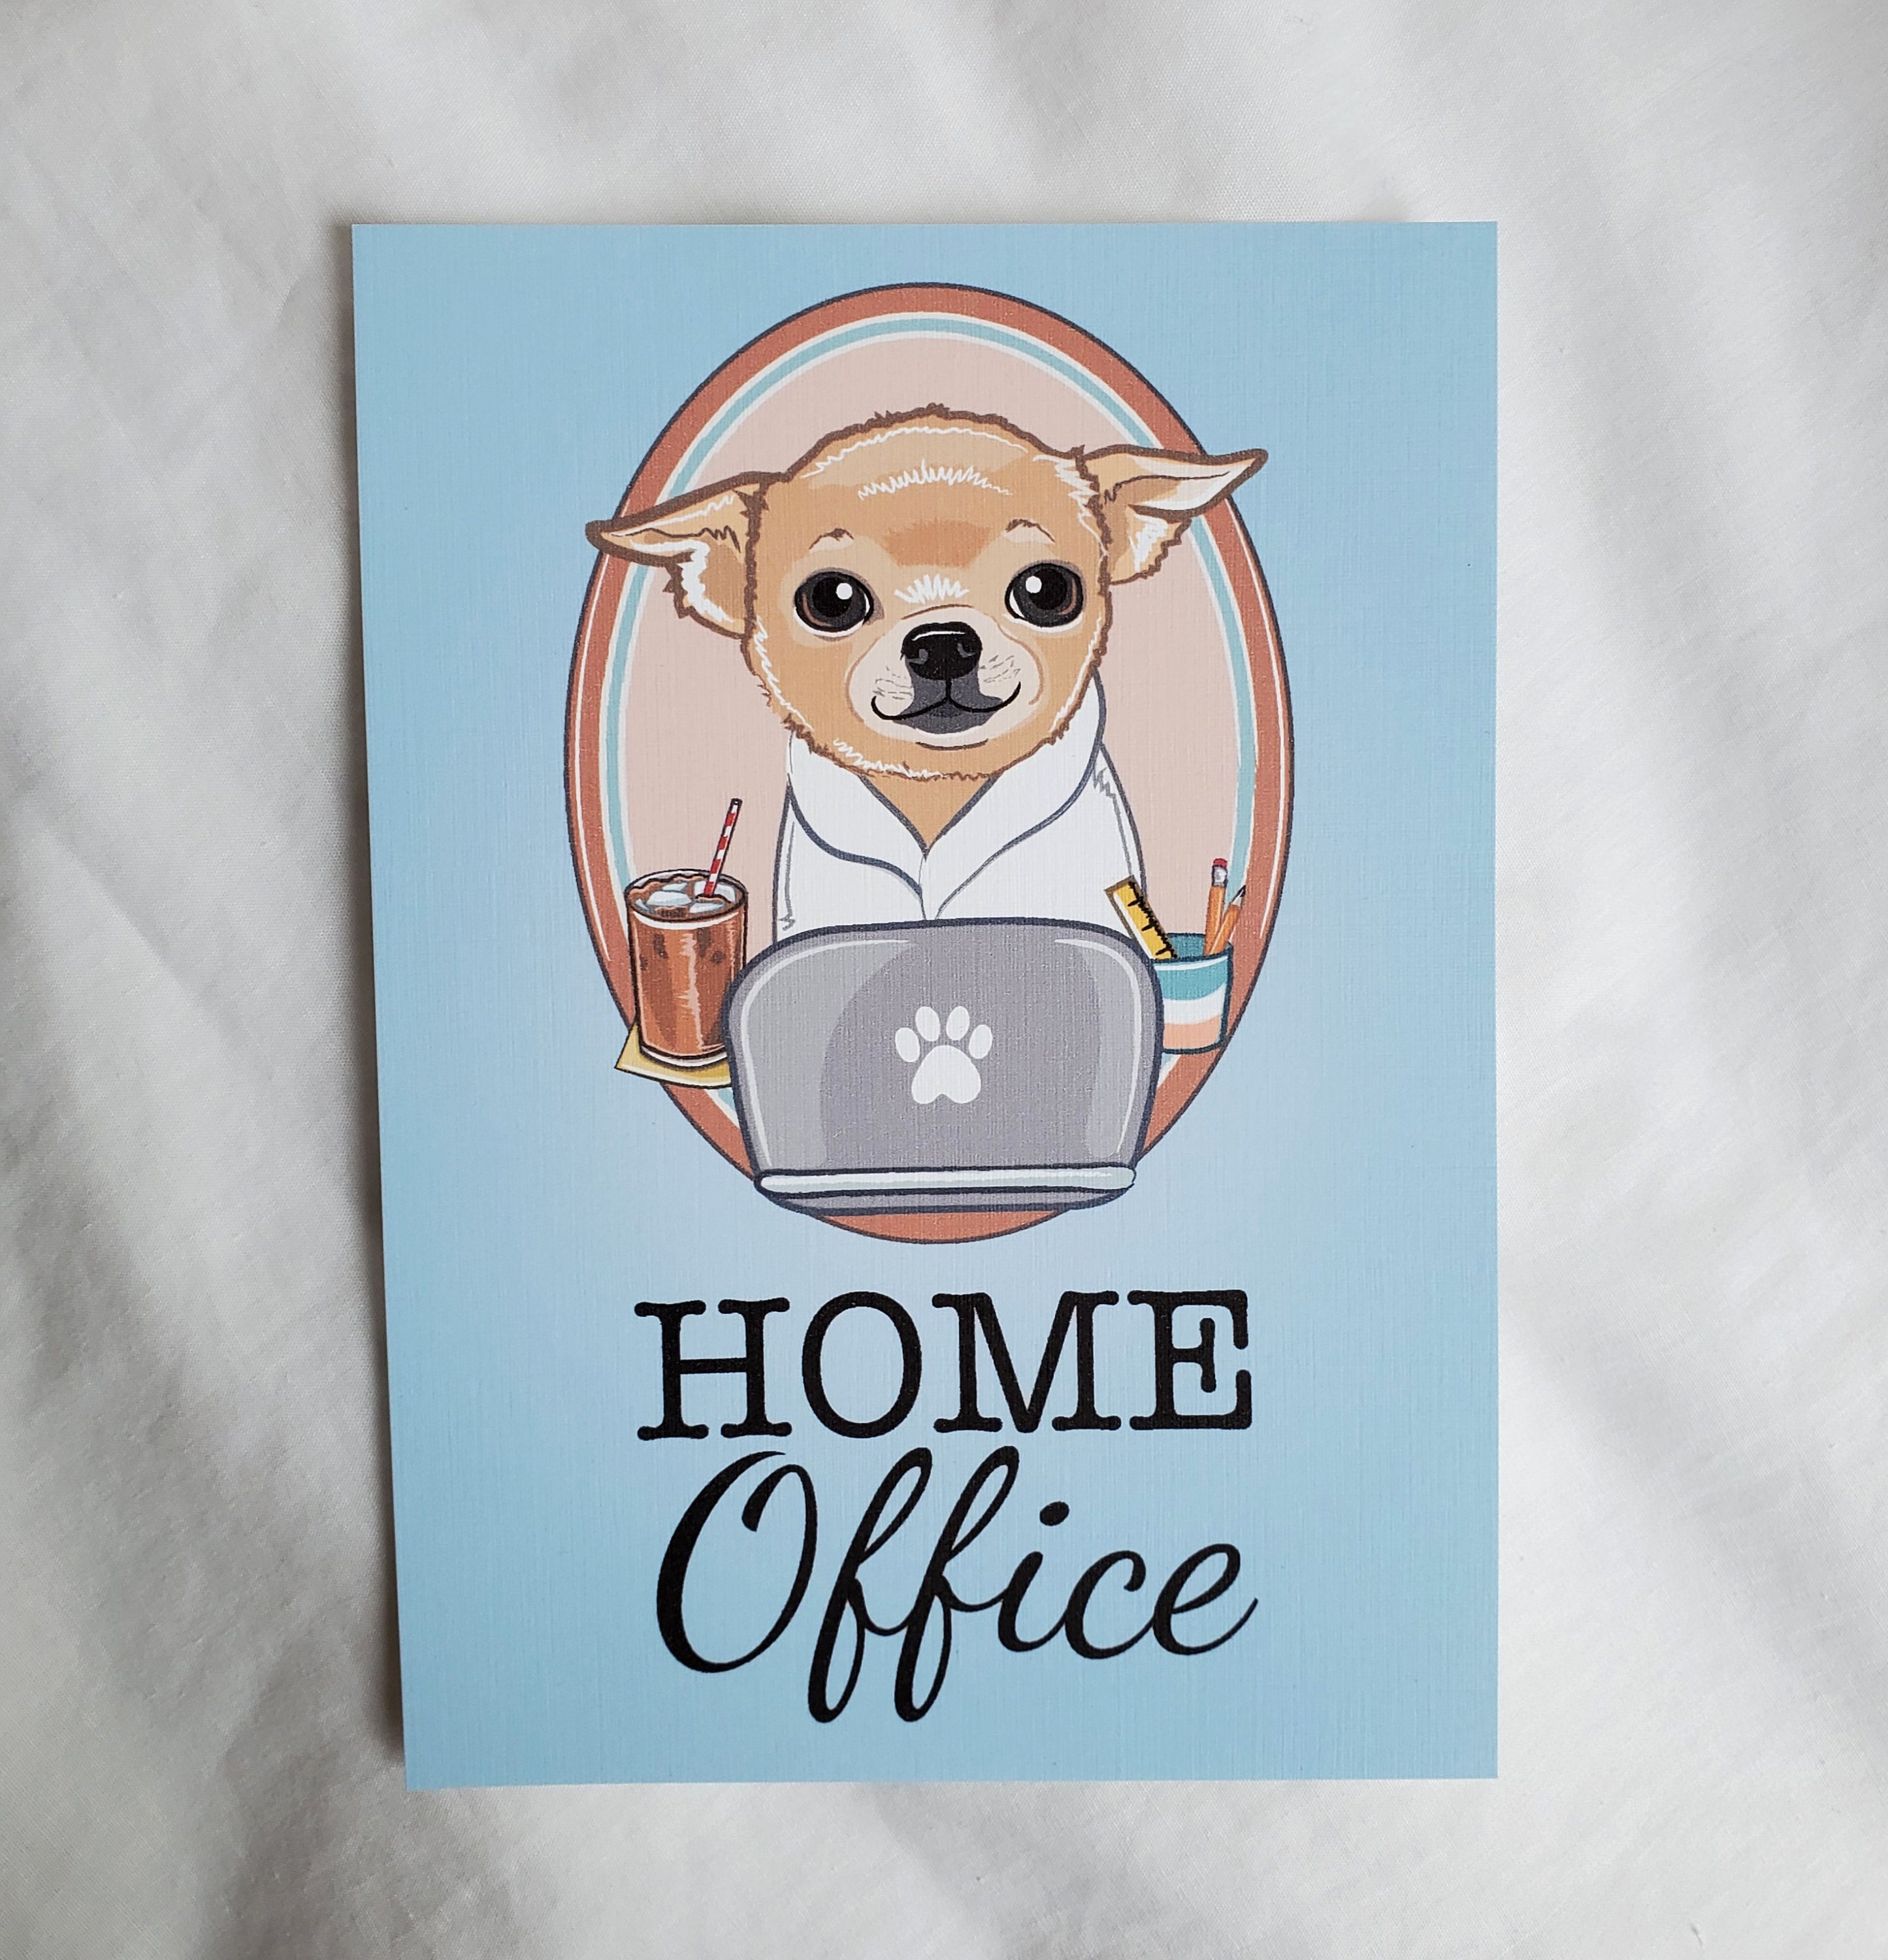 Home Office Chihuahua 5x7 Eco-friendly Print on Linen Paper - Etsy